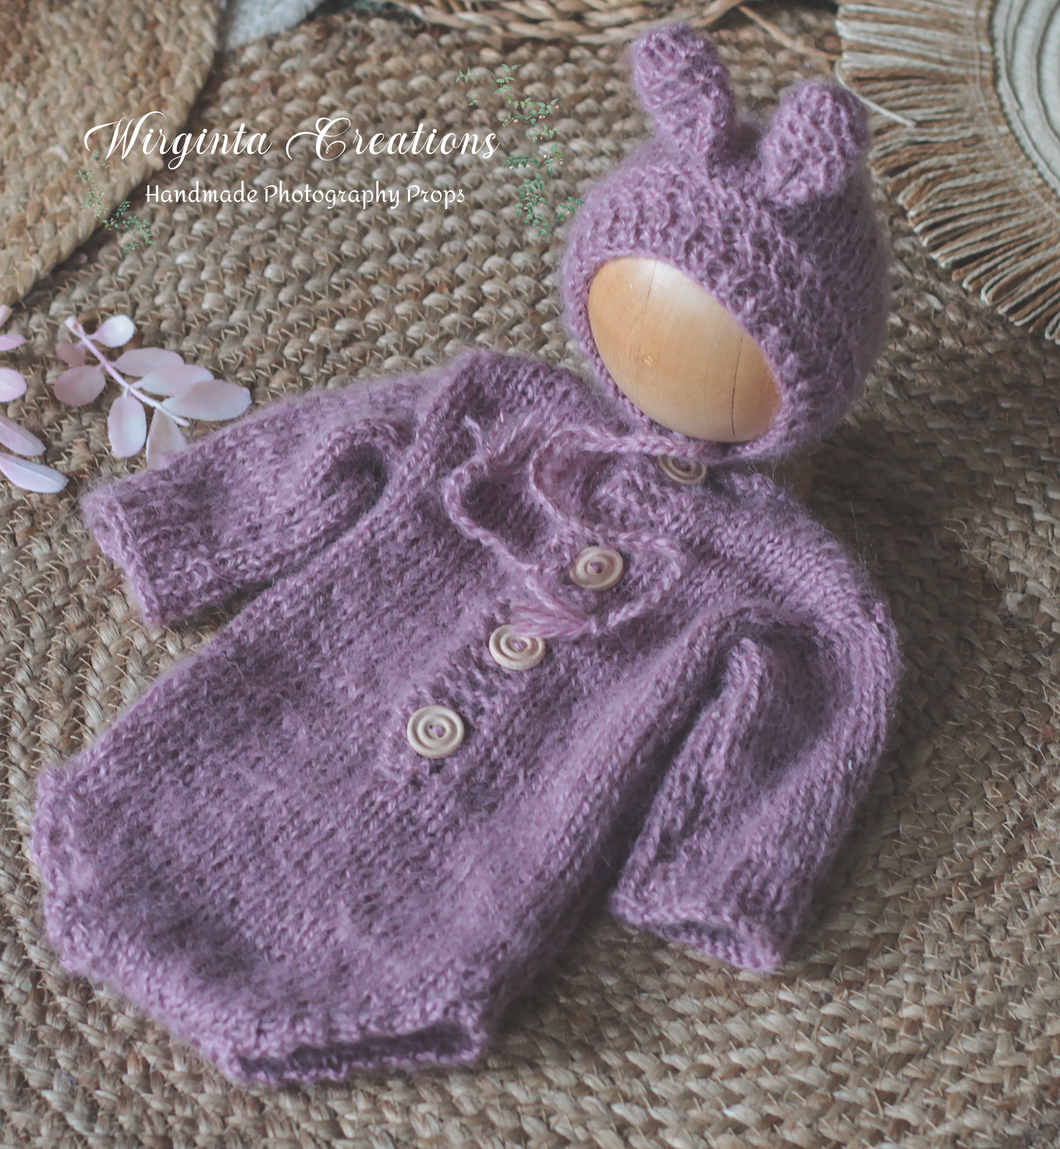 Plum Colour Knitted Newborn Bunny Outfit with Matching Bonnet - Photo Prop